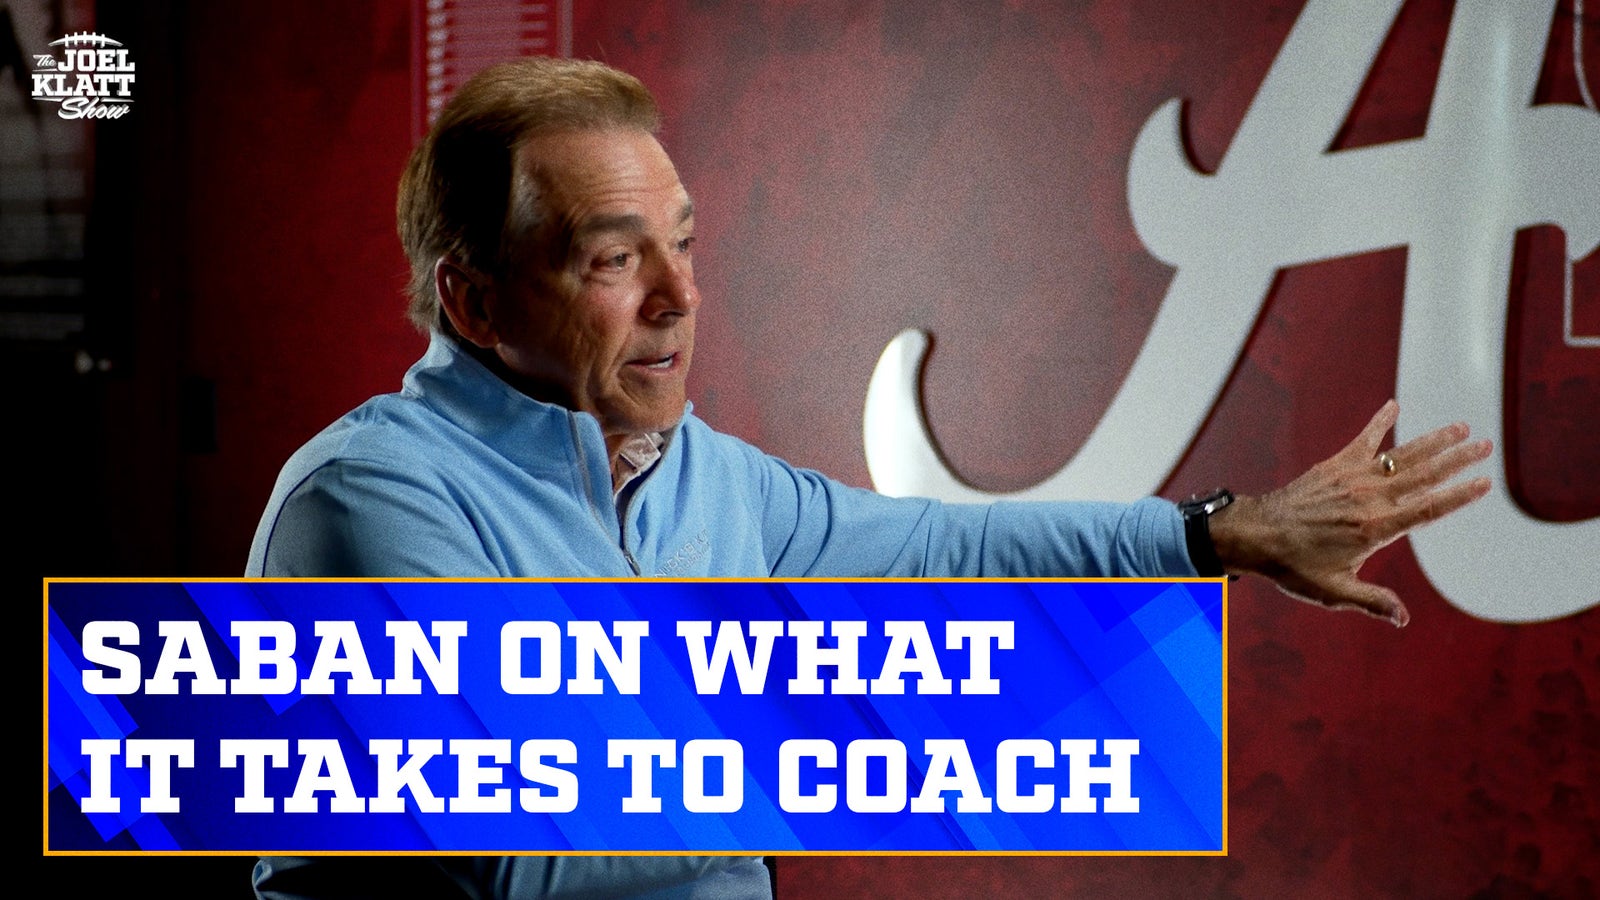 Nick Saban on what it takes to coach and thoughts on recruiting